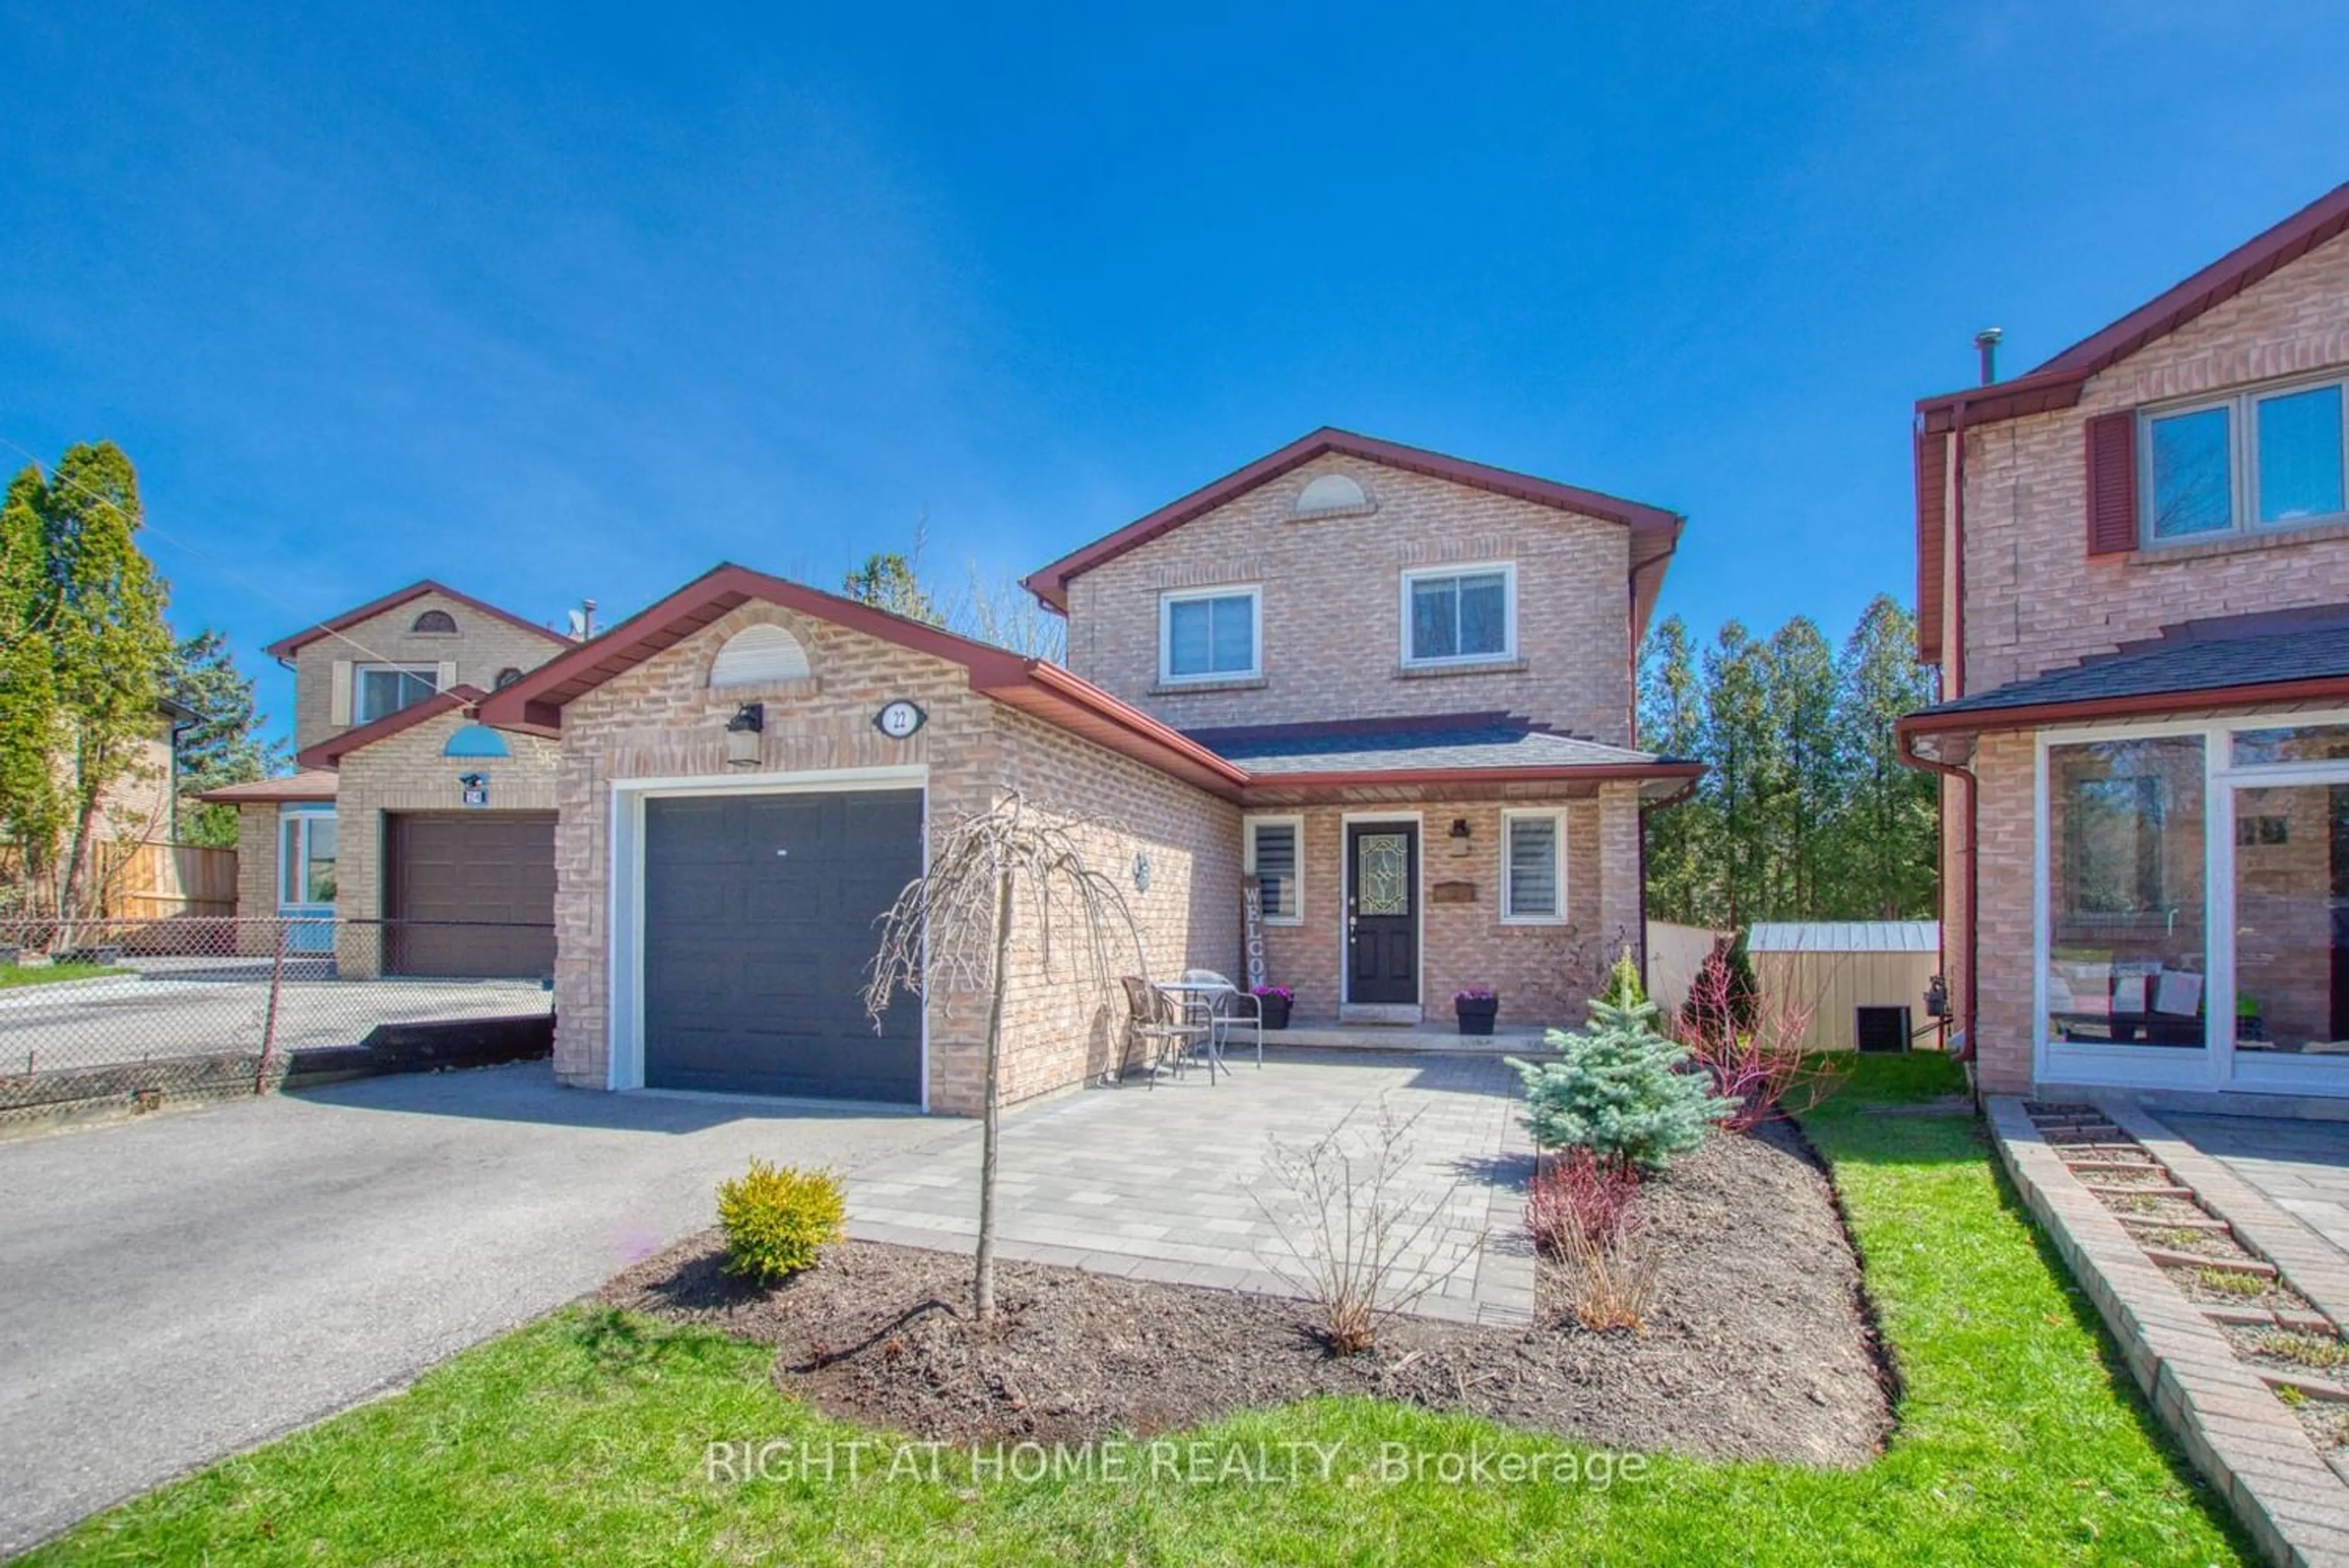 Home with brick exterior material for 22 Valhalla Crt, Aurora Ontario L4G 5W3